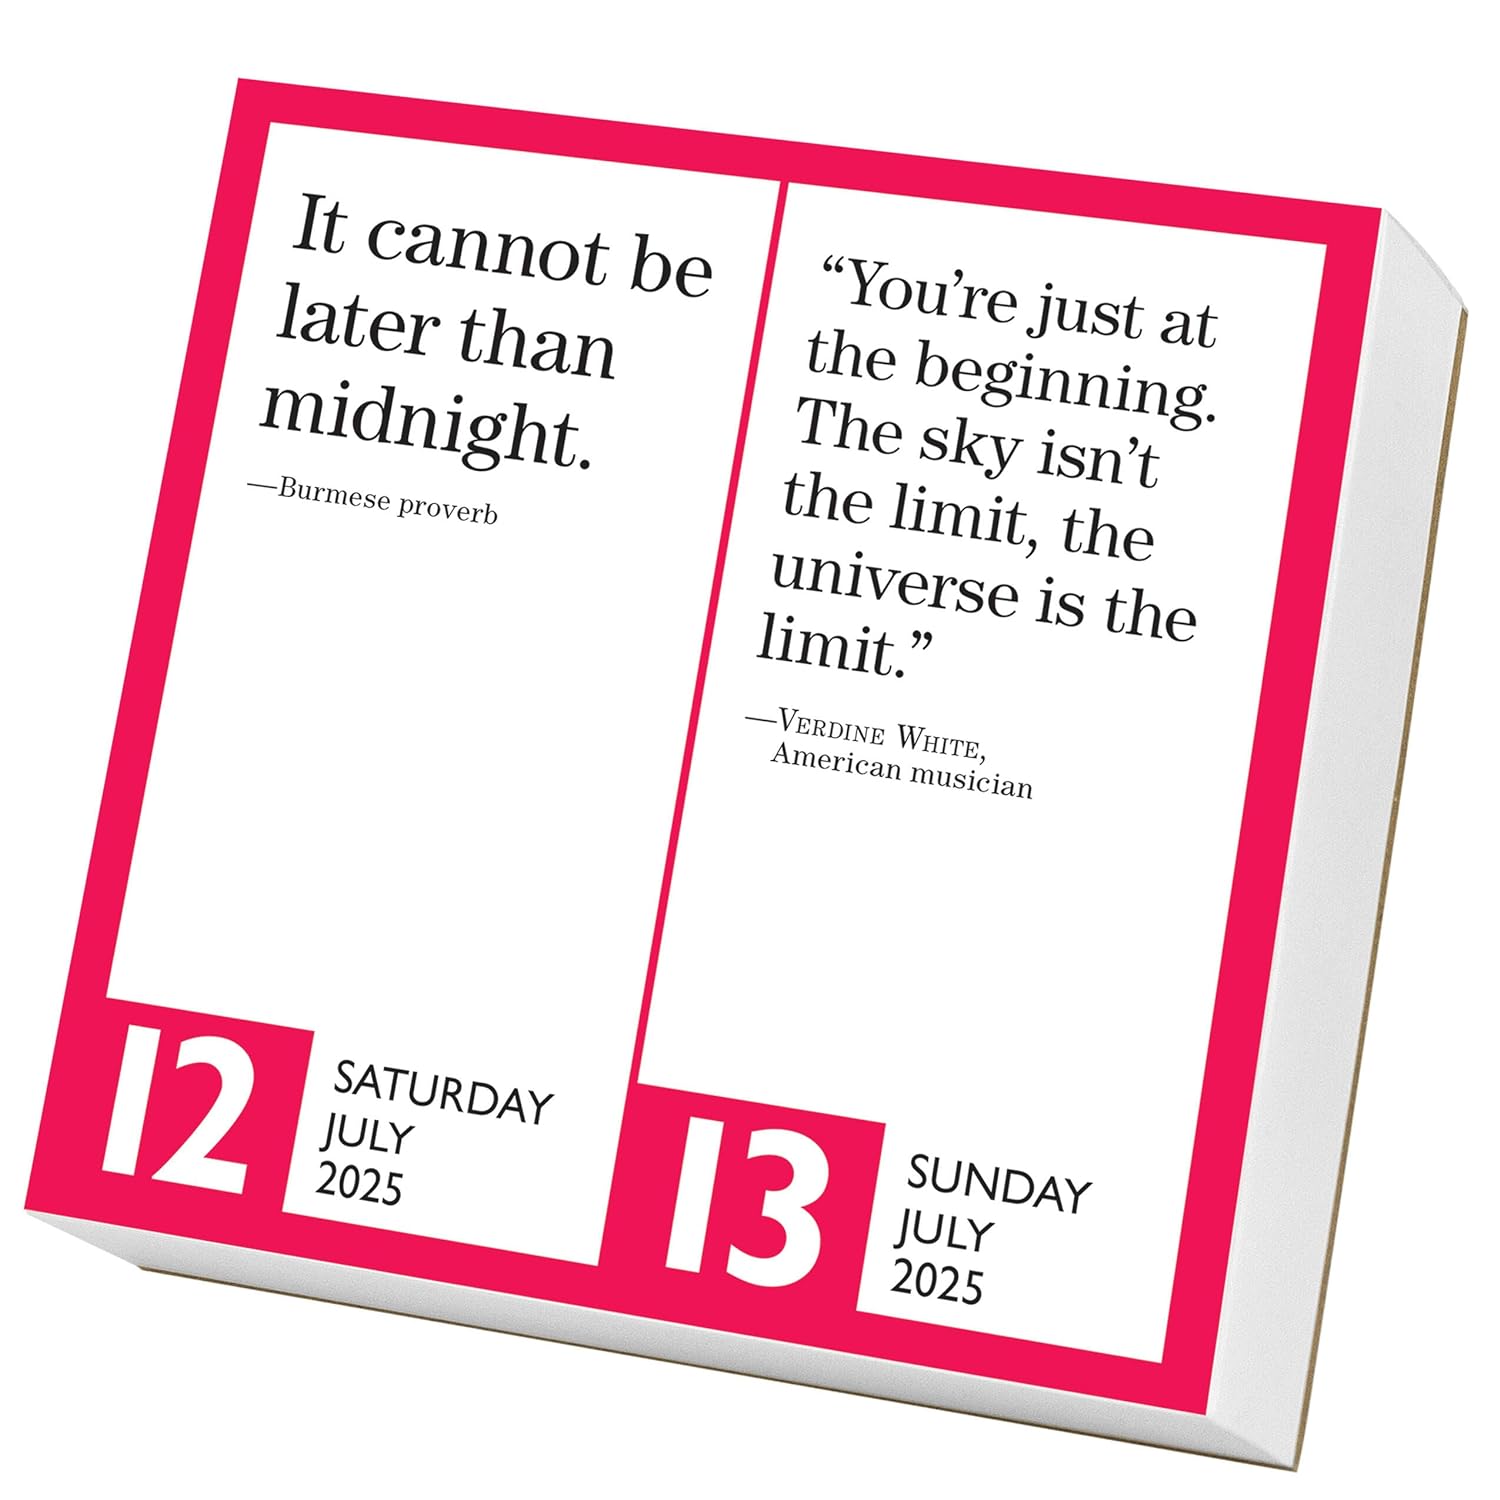 2025 Keep Calm and Carry On - Daily Boxed Page-A-Day Calendar